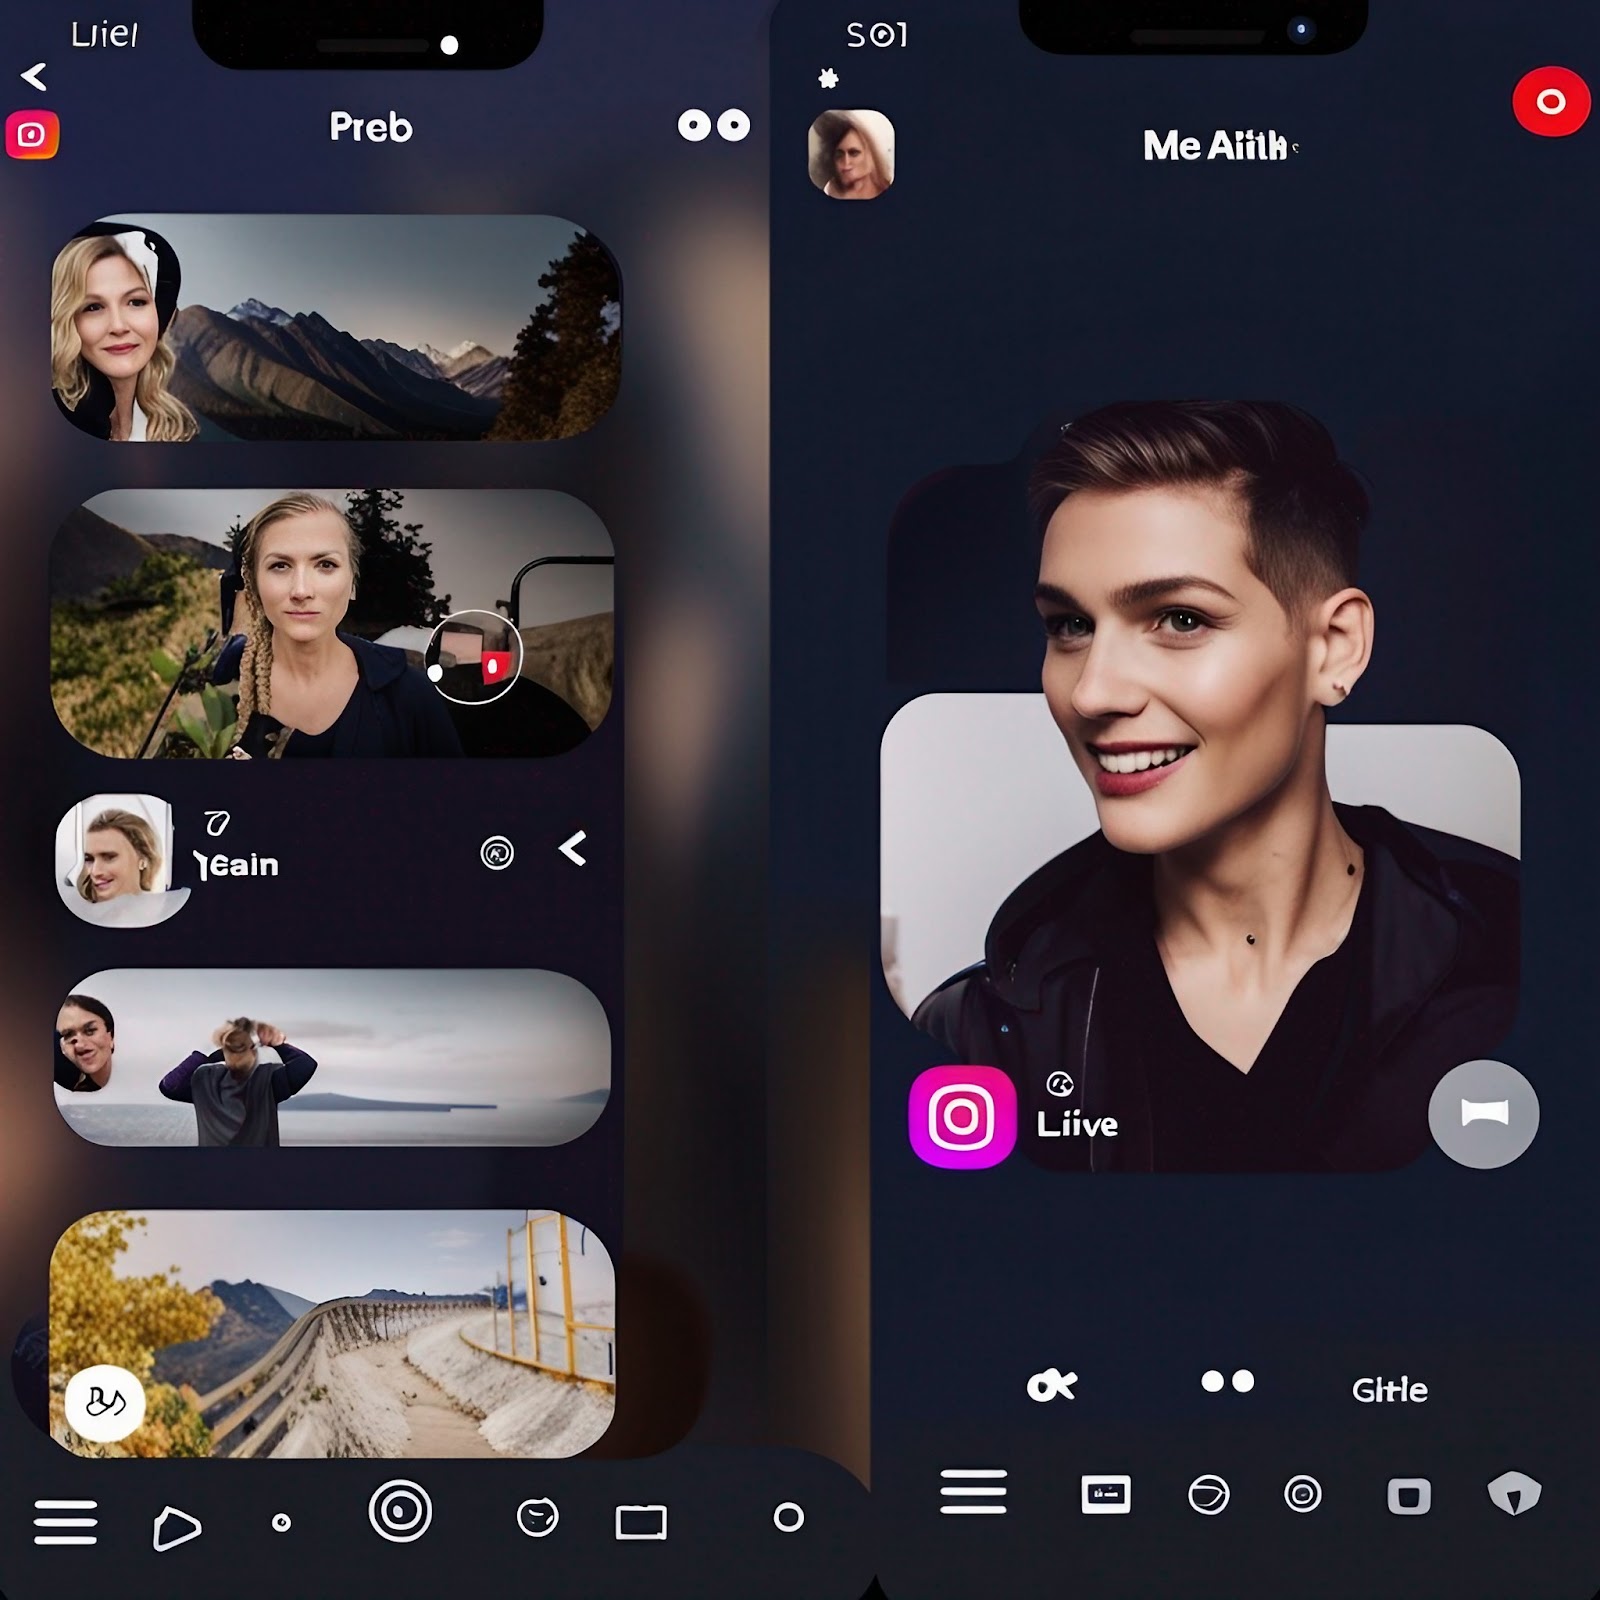 Instagram Live harnesses the power of real-time video to create an immersive and interactive experience for viewers.